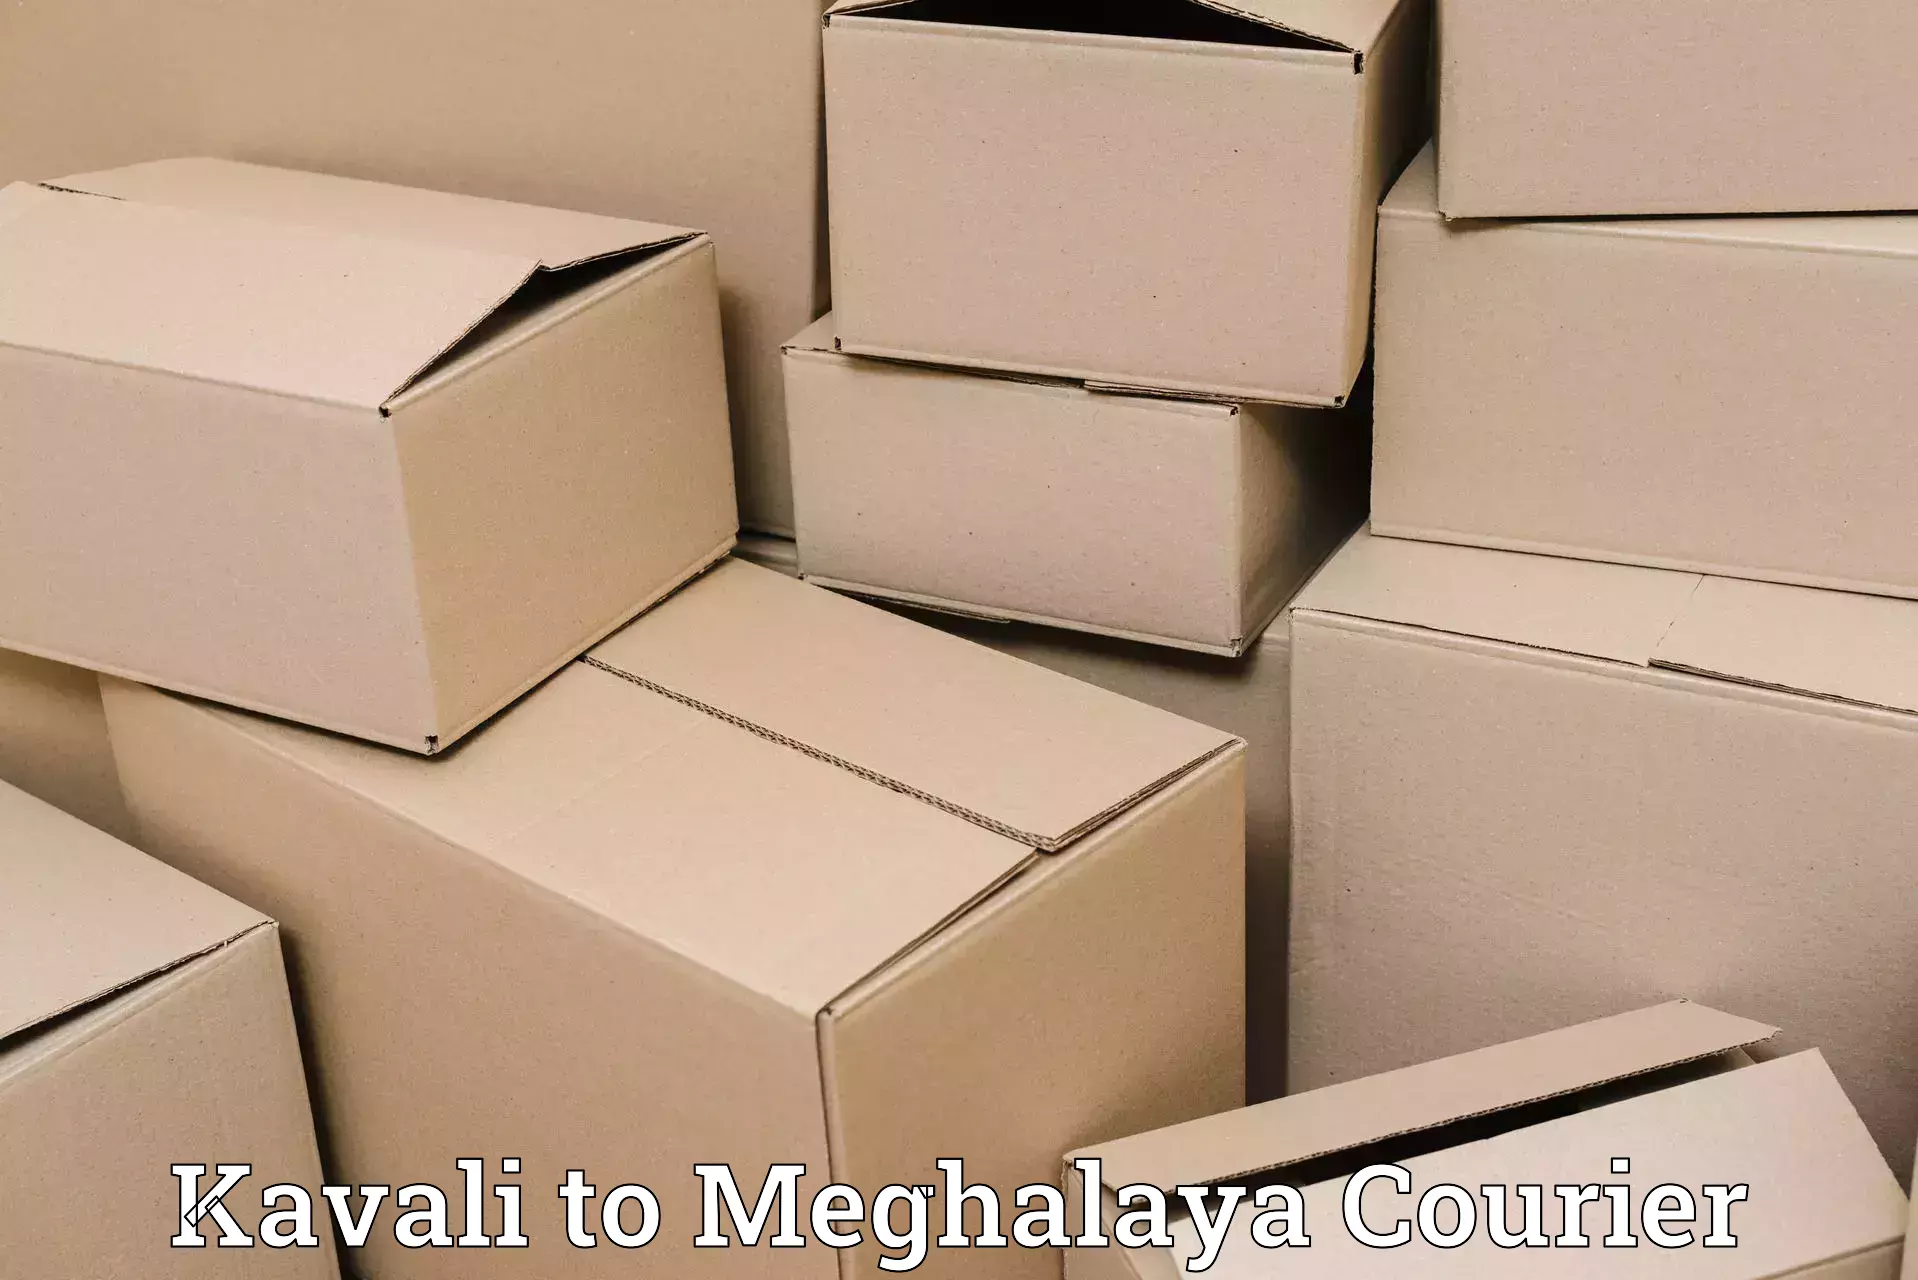 Express delivery capabilities Kavali to Meghalaya